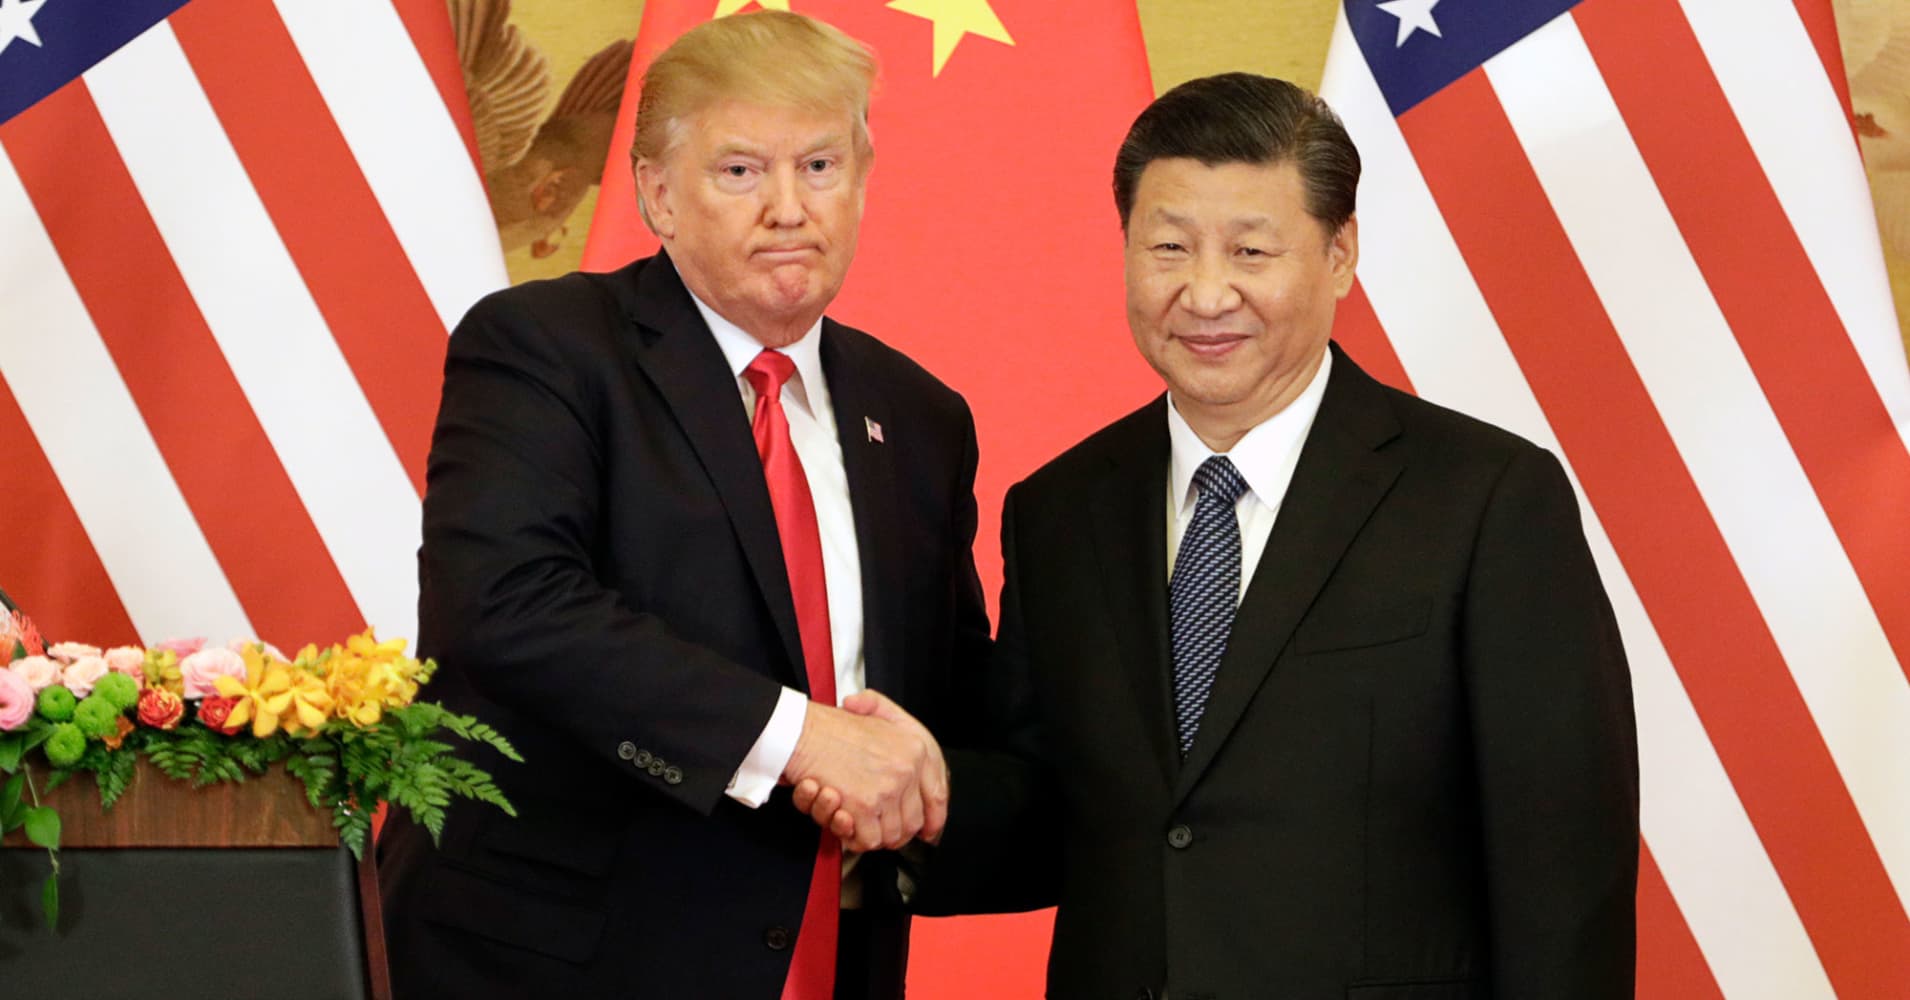 Trump's trade war with China matters more to the market than the elections and it's not going well